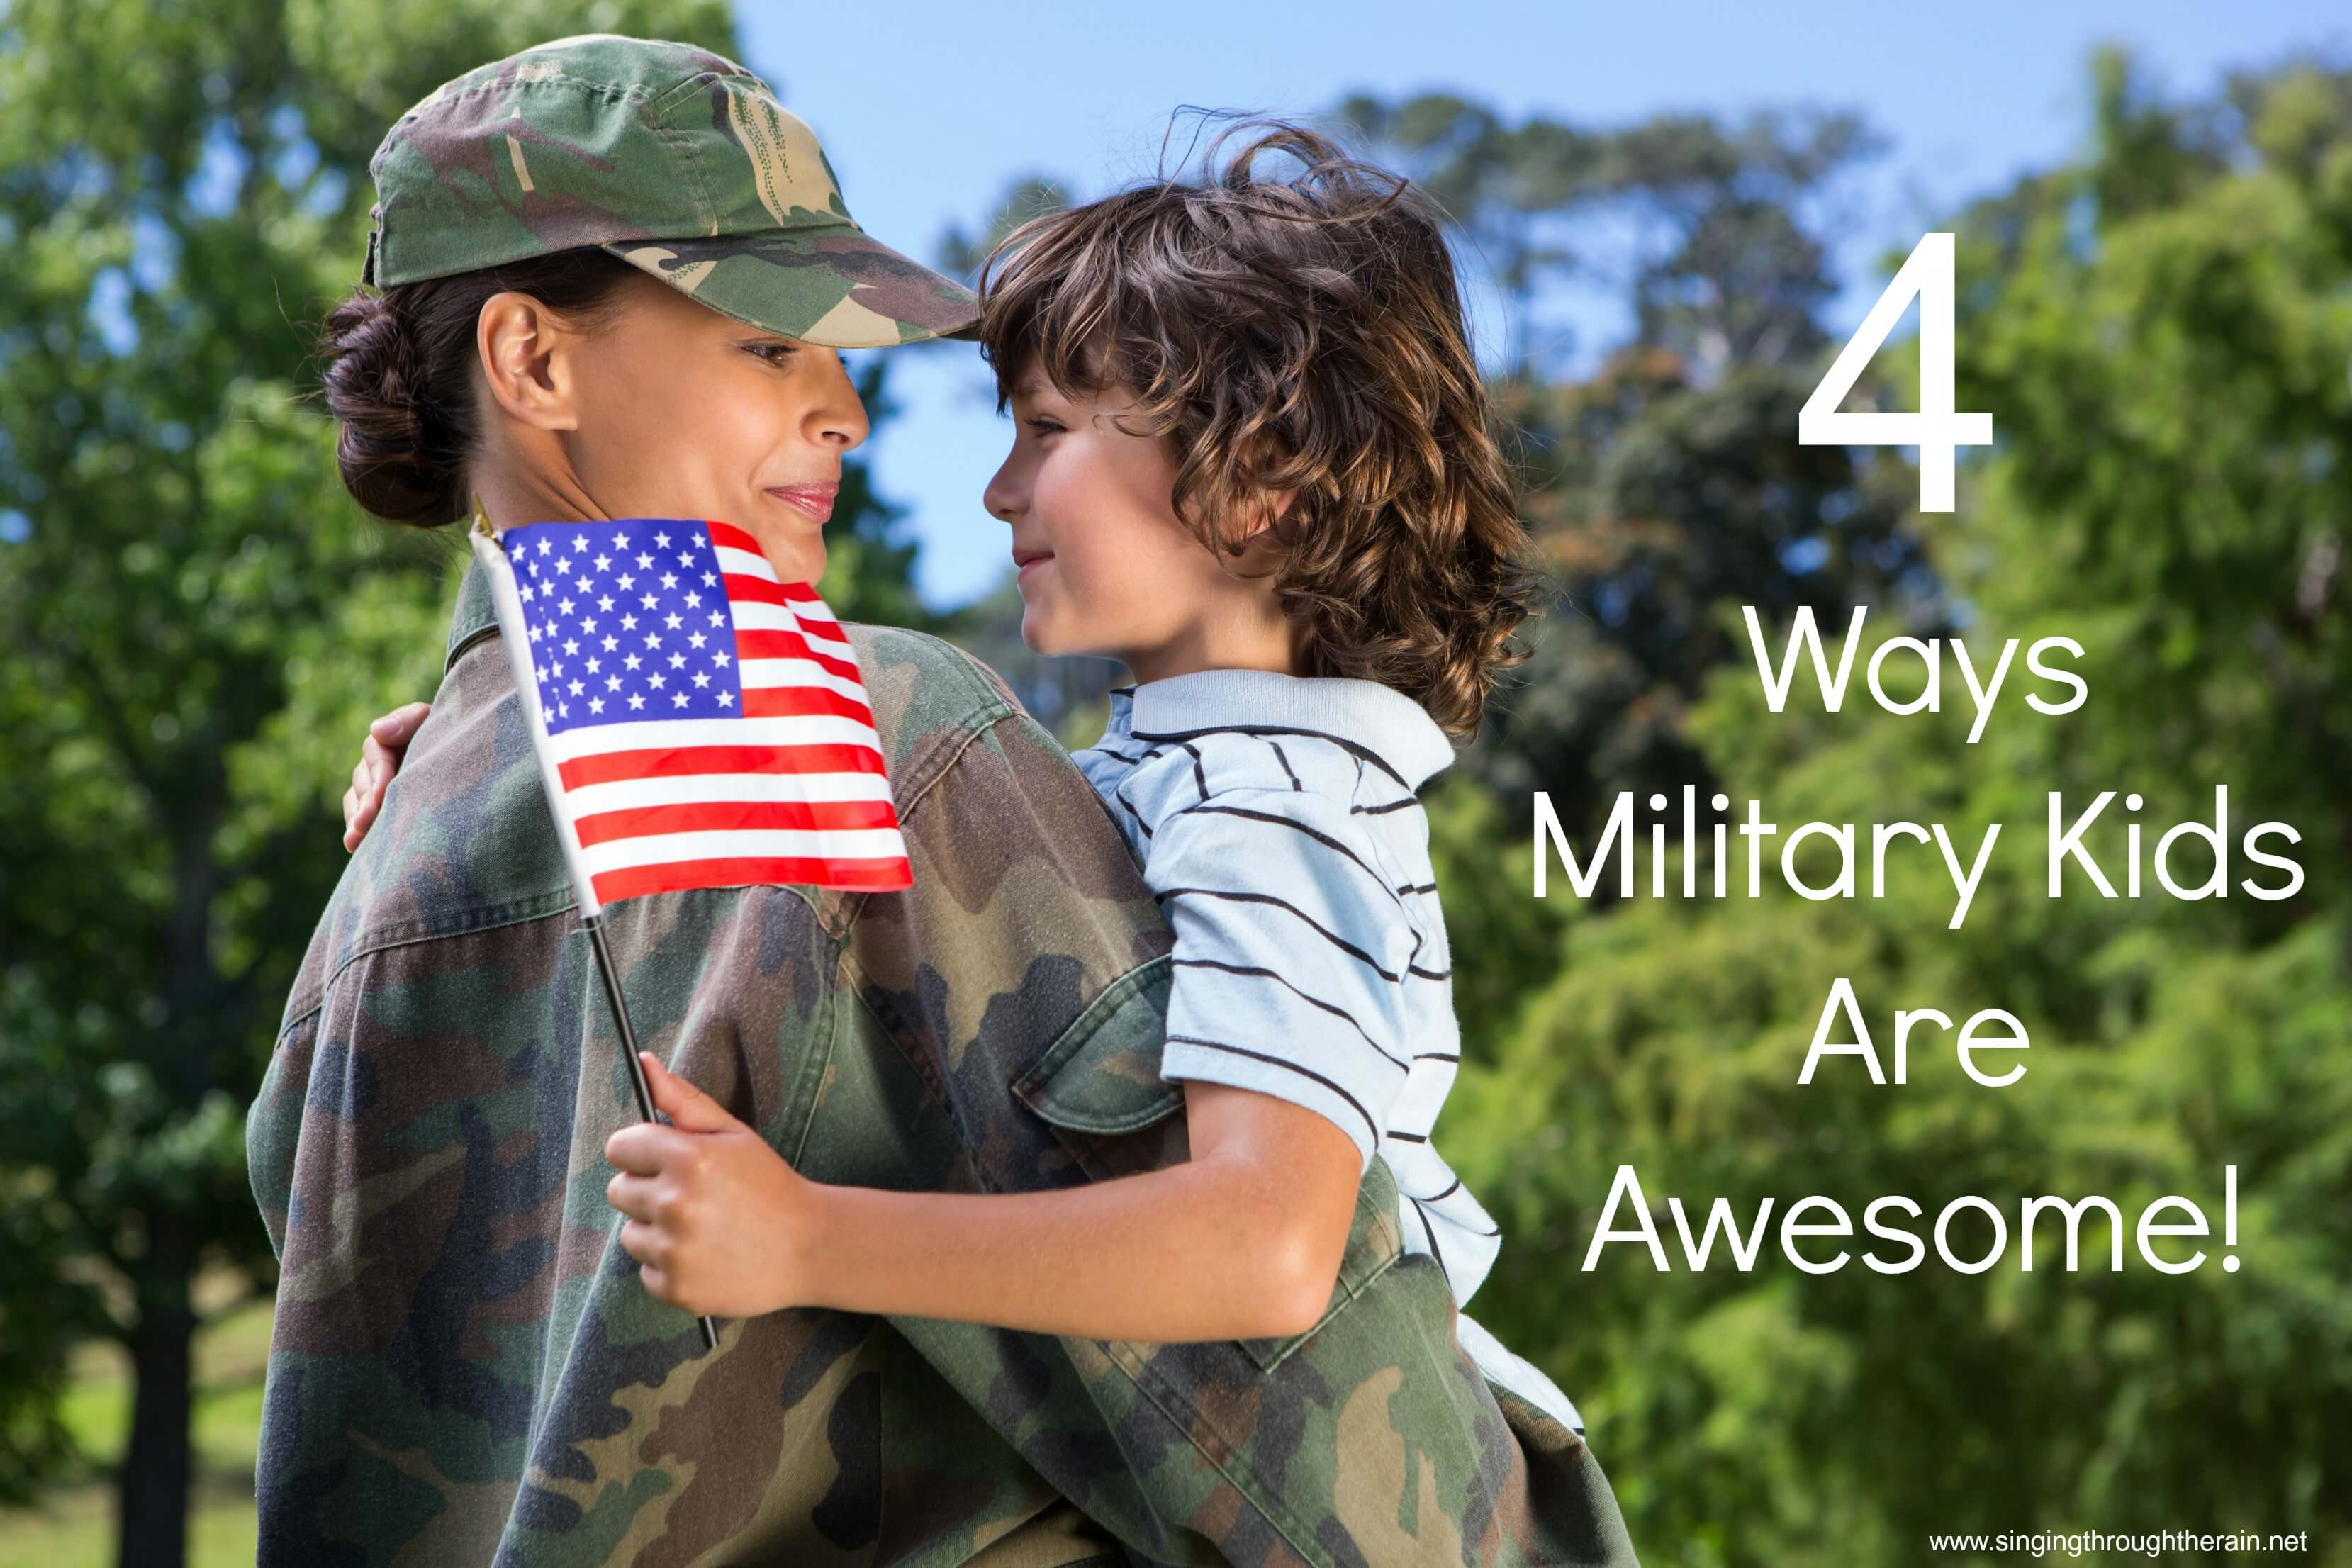 4 Ways Military Kids Are Awesome!